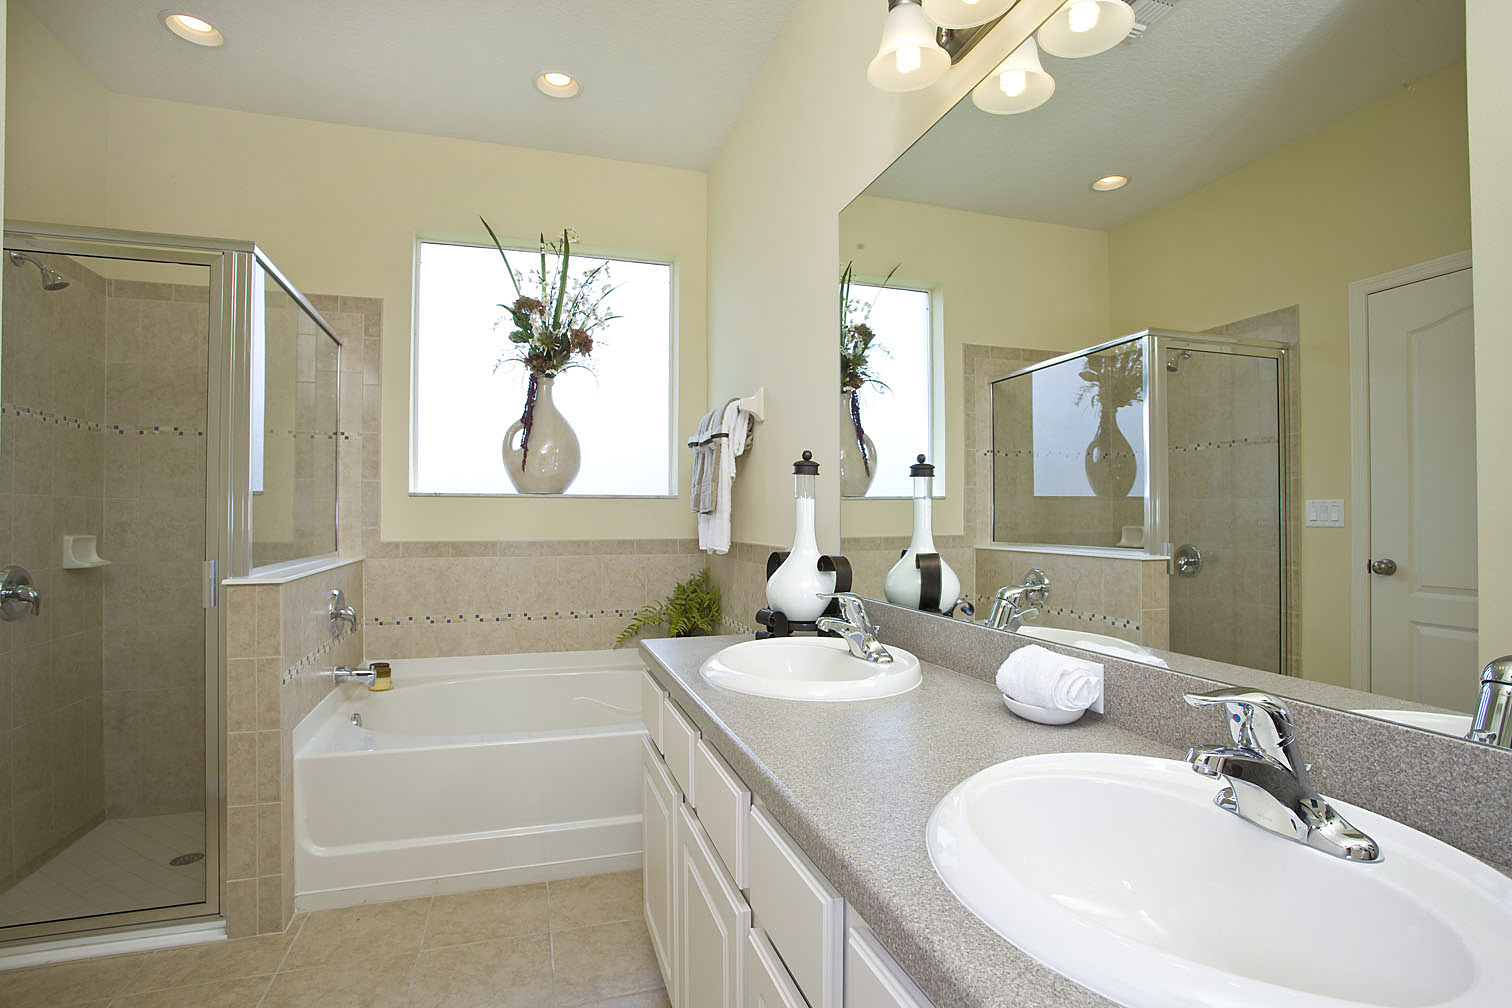 “Beyond Appearance: Compelling Reasons to Keep Your Bathroom Spotless”